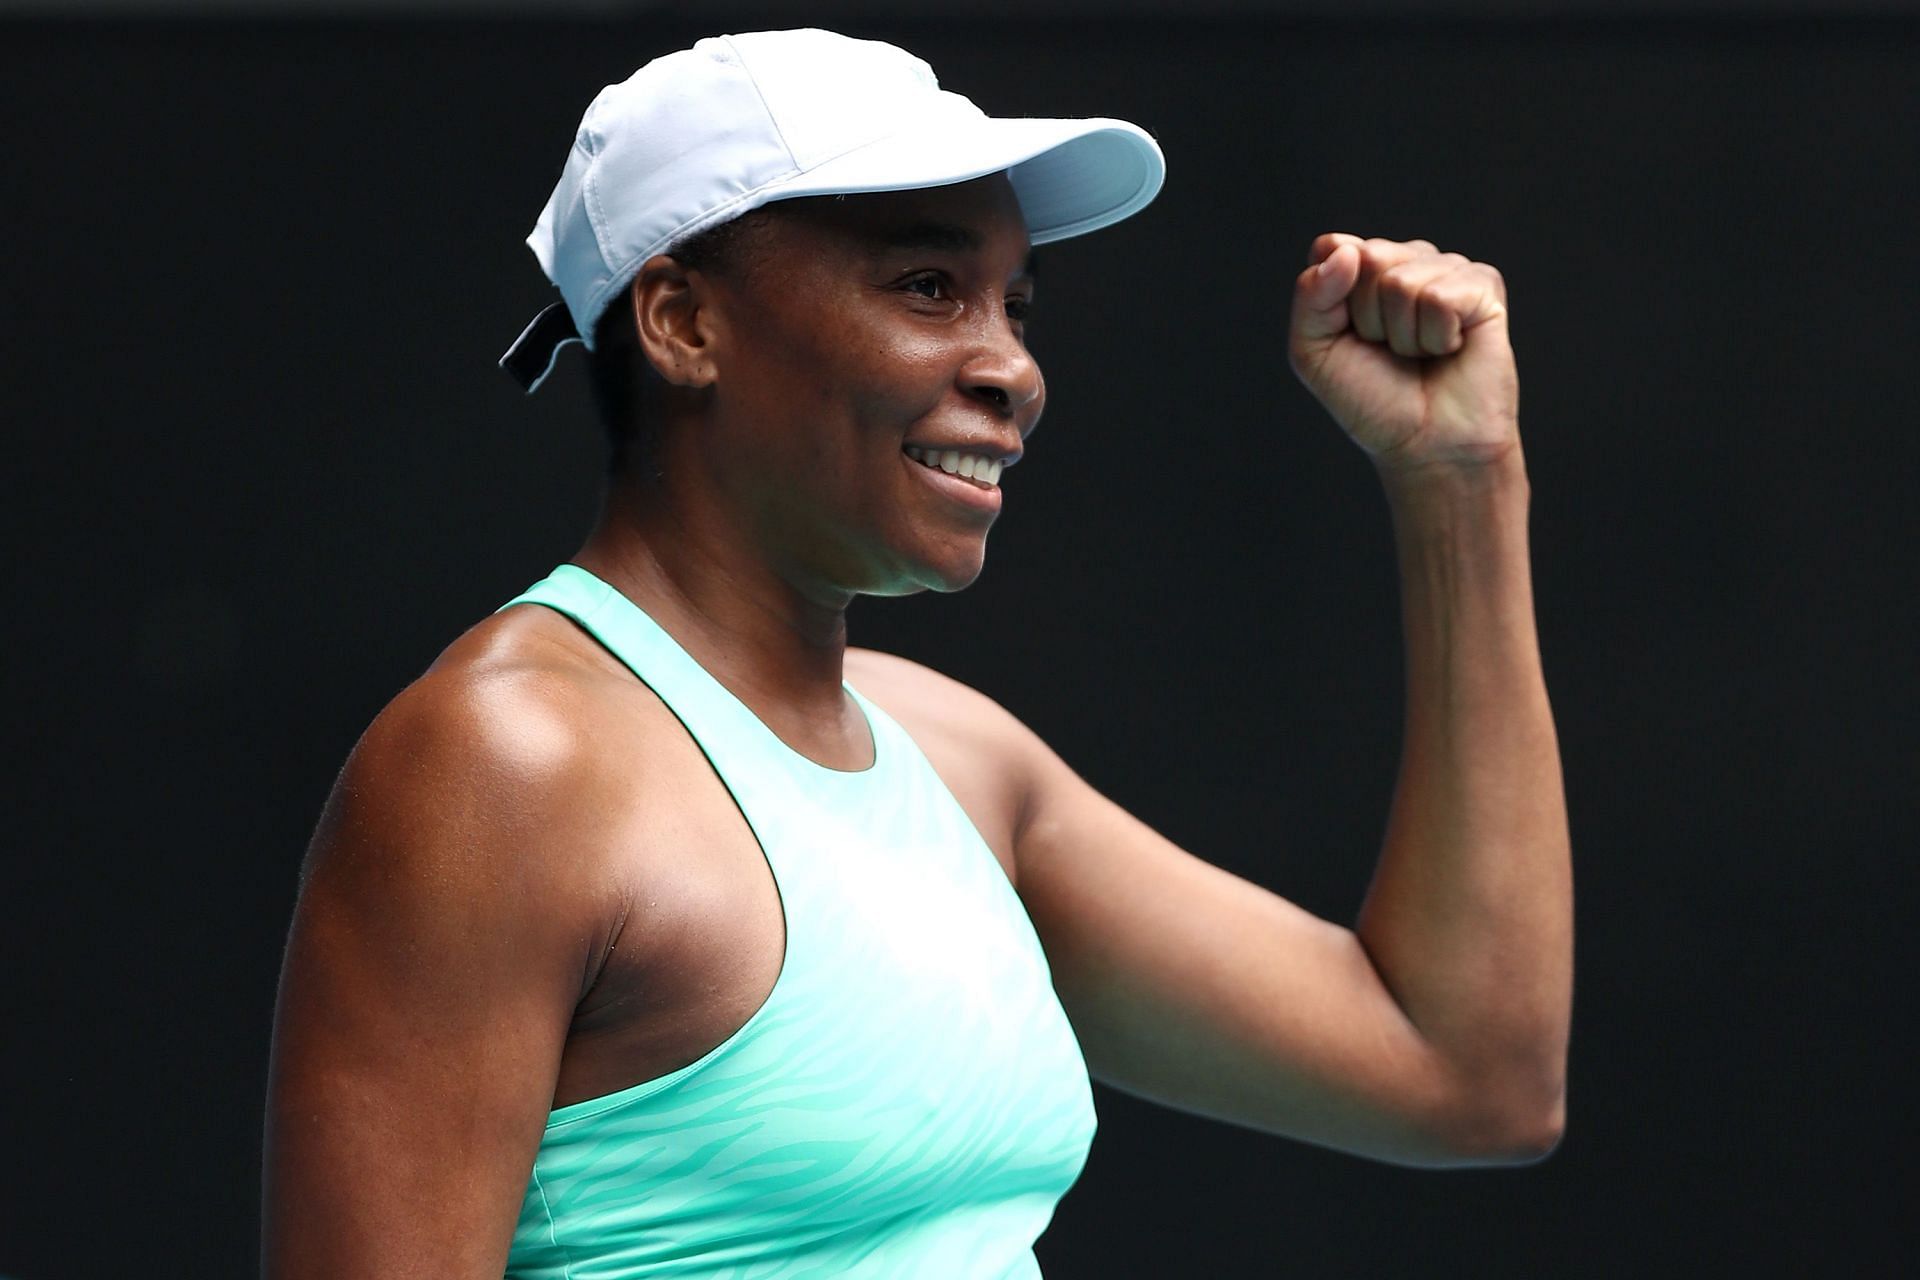 Venus Williams is currently ranked 1010th